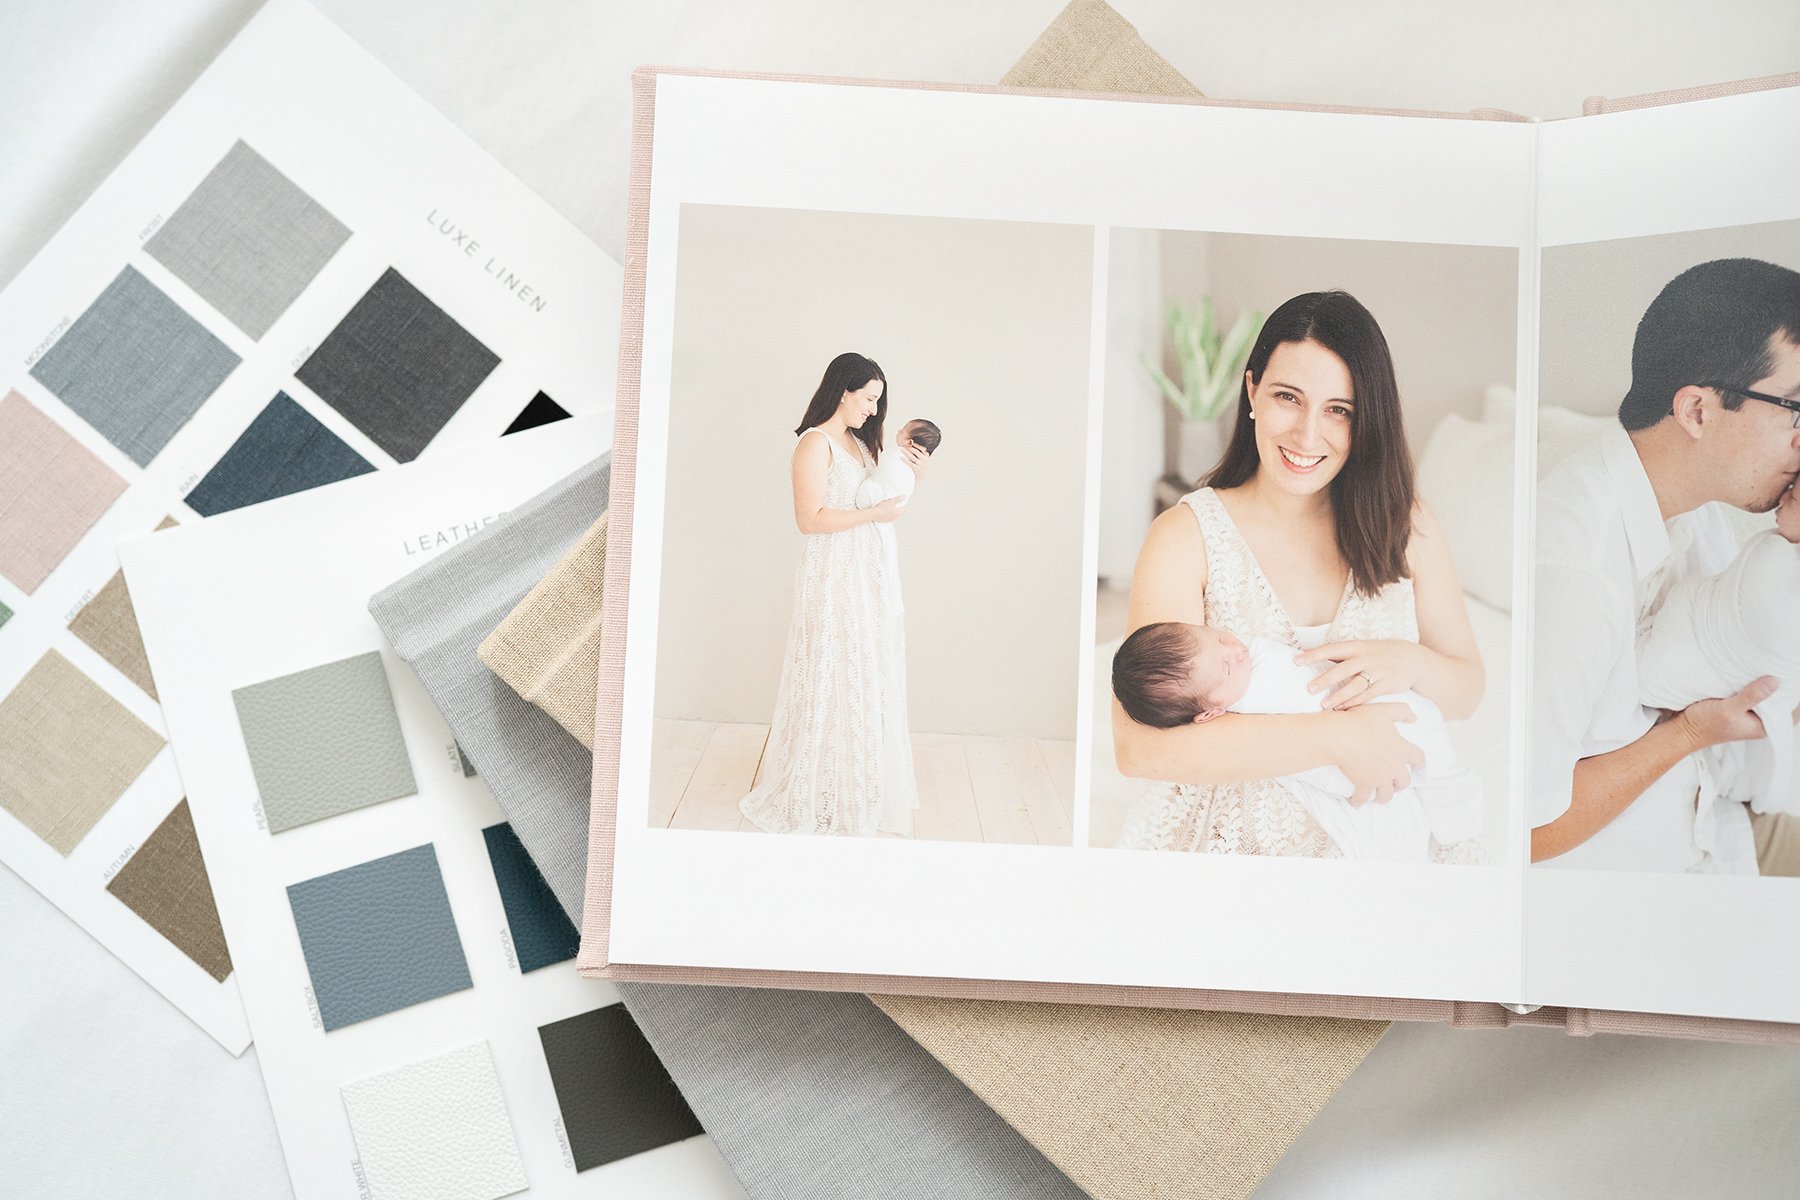 High quality, linen newborn photo album with images of mom holding newborn baby taken at Louisville KY photography studio